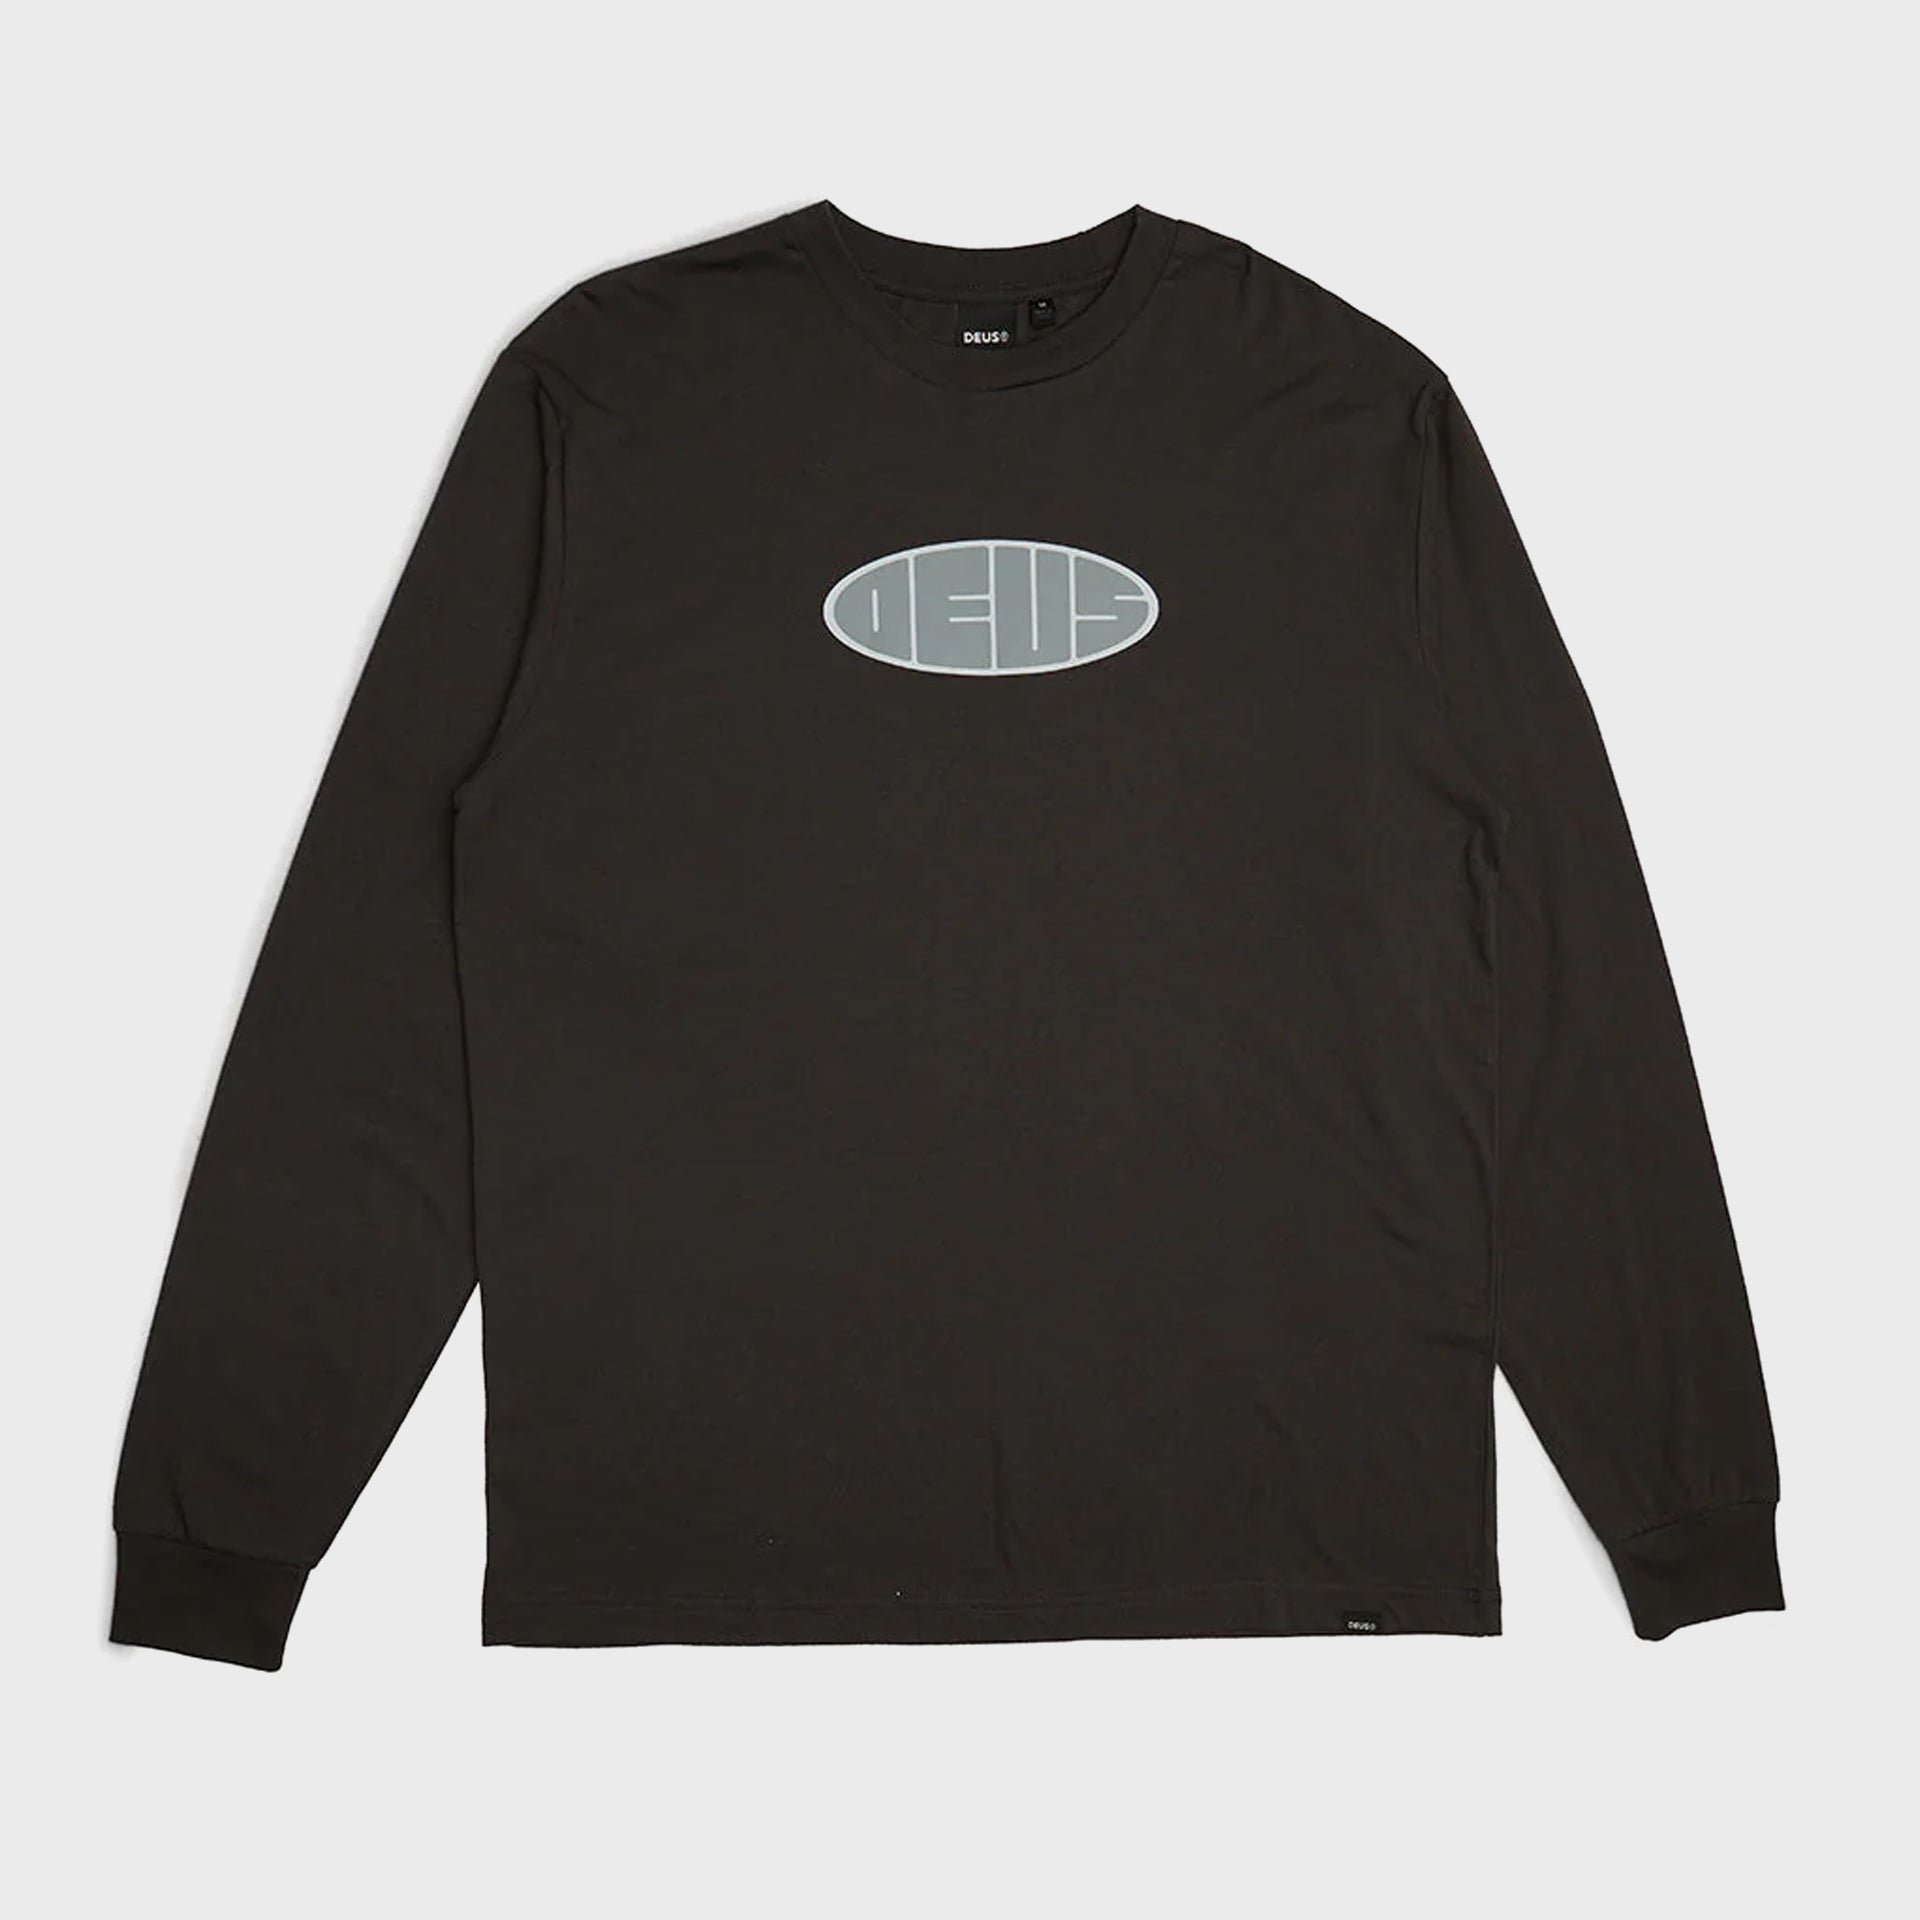 Eclipse Long Sleeve Tee - Mens L/S T-Shirt - Anthracite - ManGo Surfing